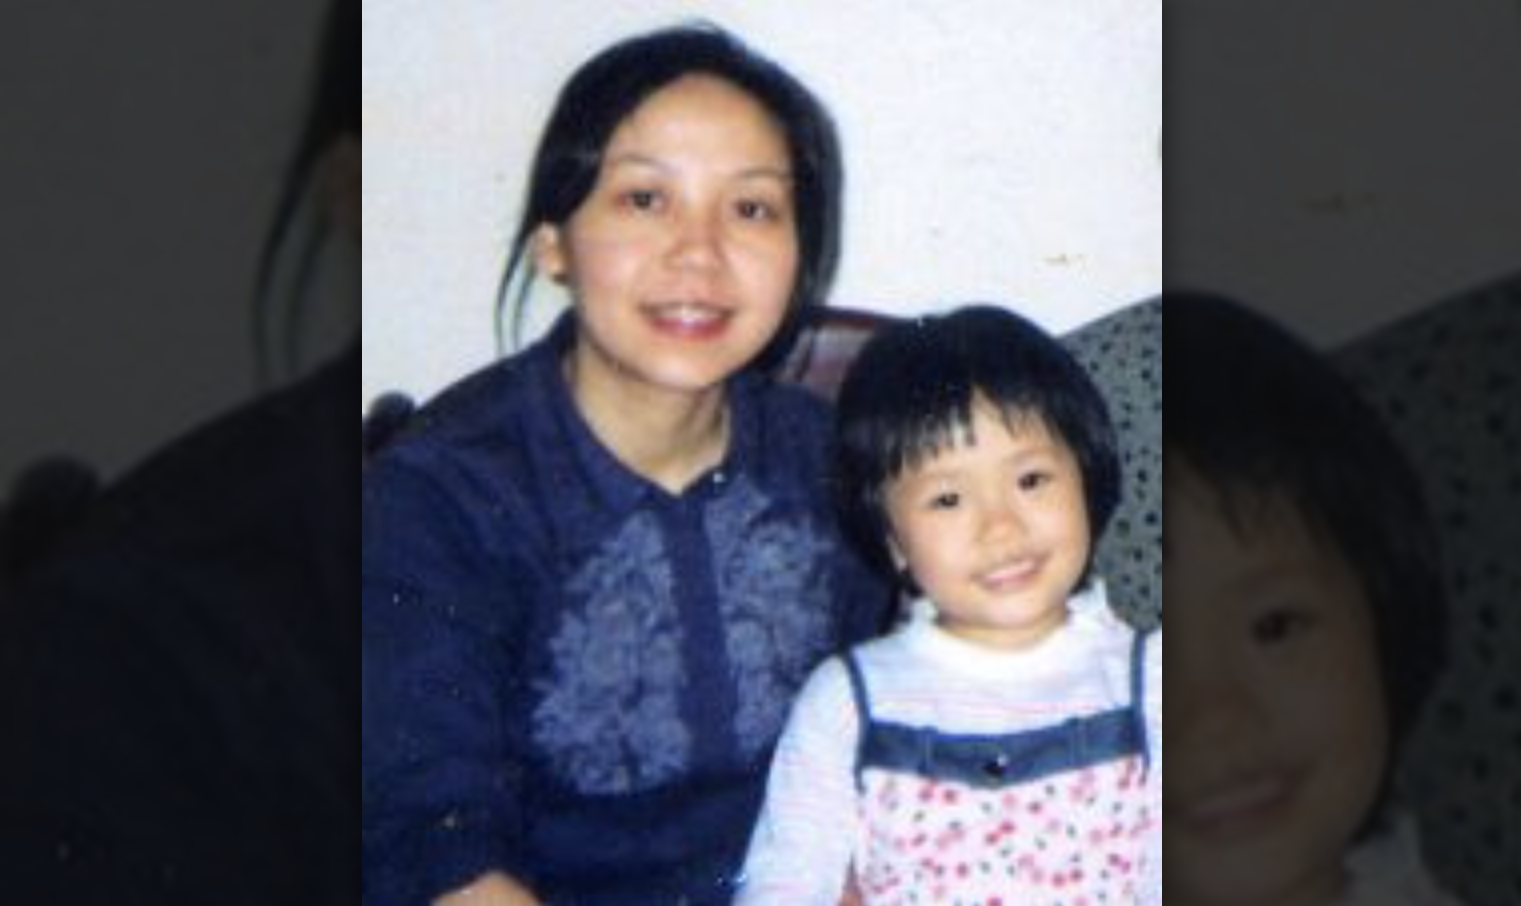 Grace Chen and her mother in China, in 2010 before Grace came to New York.